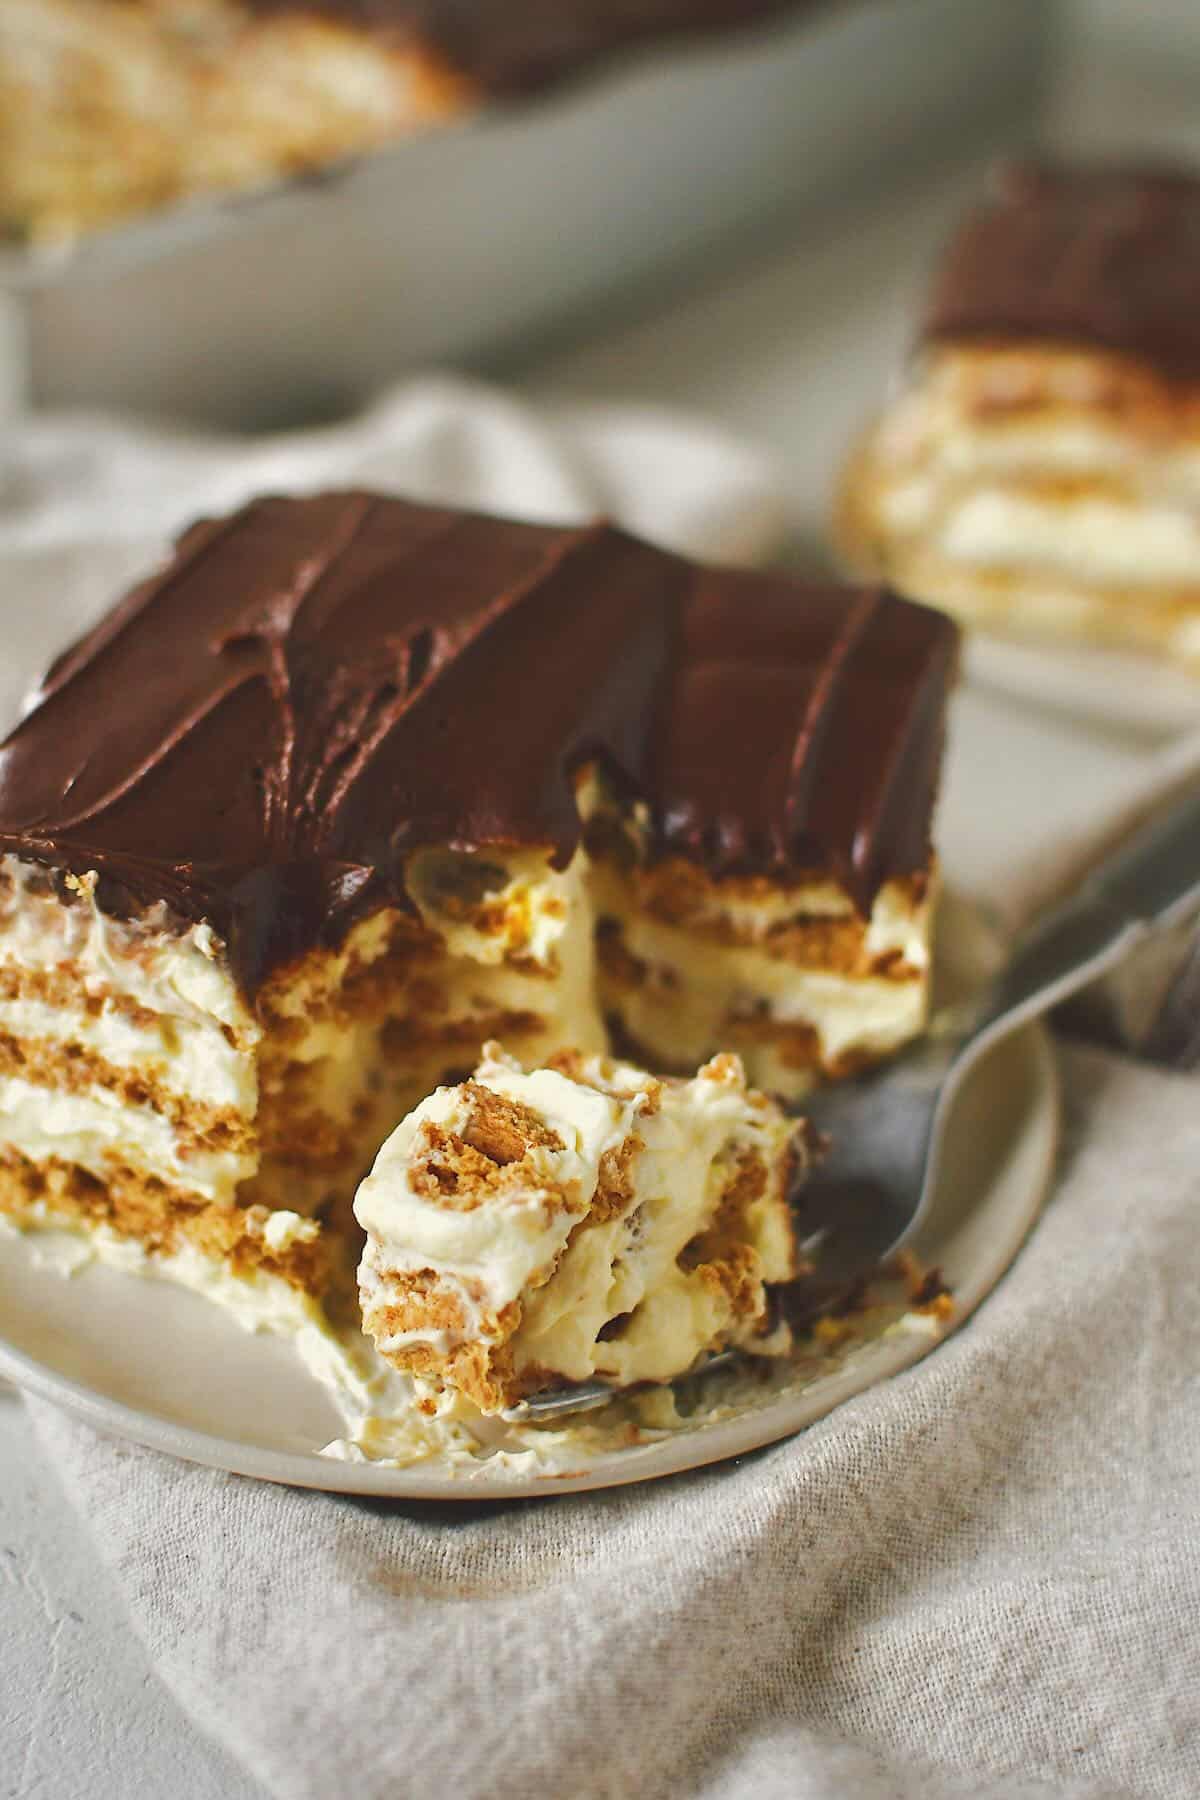 Taking a bite out of a slice of eclair cake, some on a fork ready to be enjoyed.